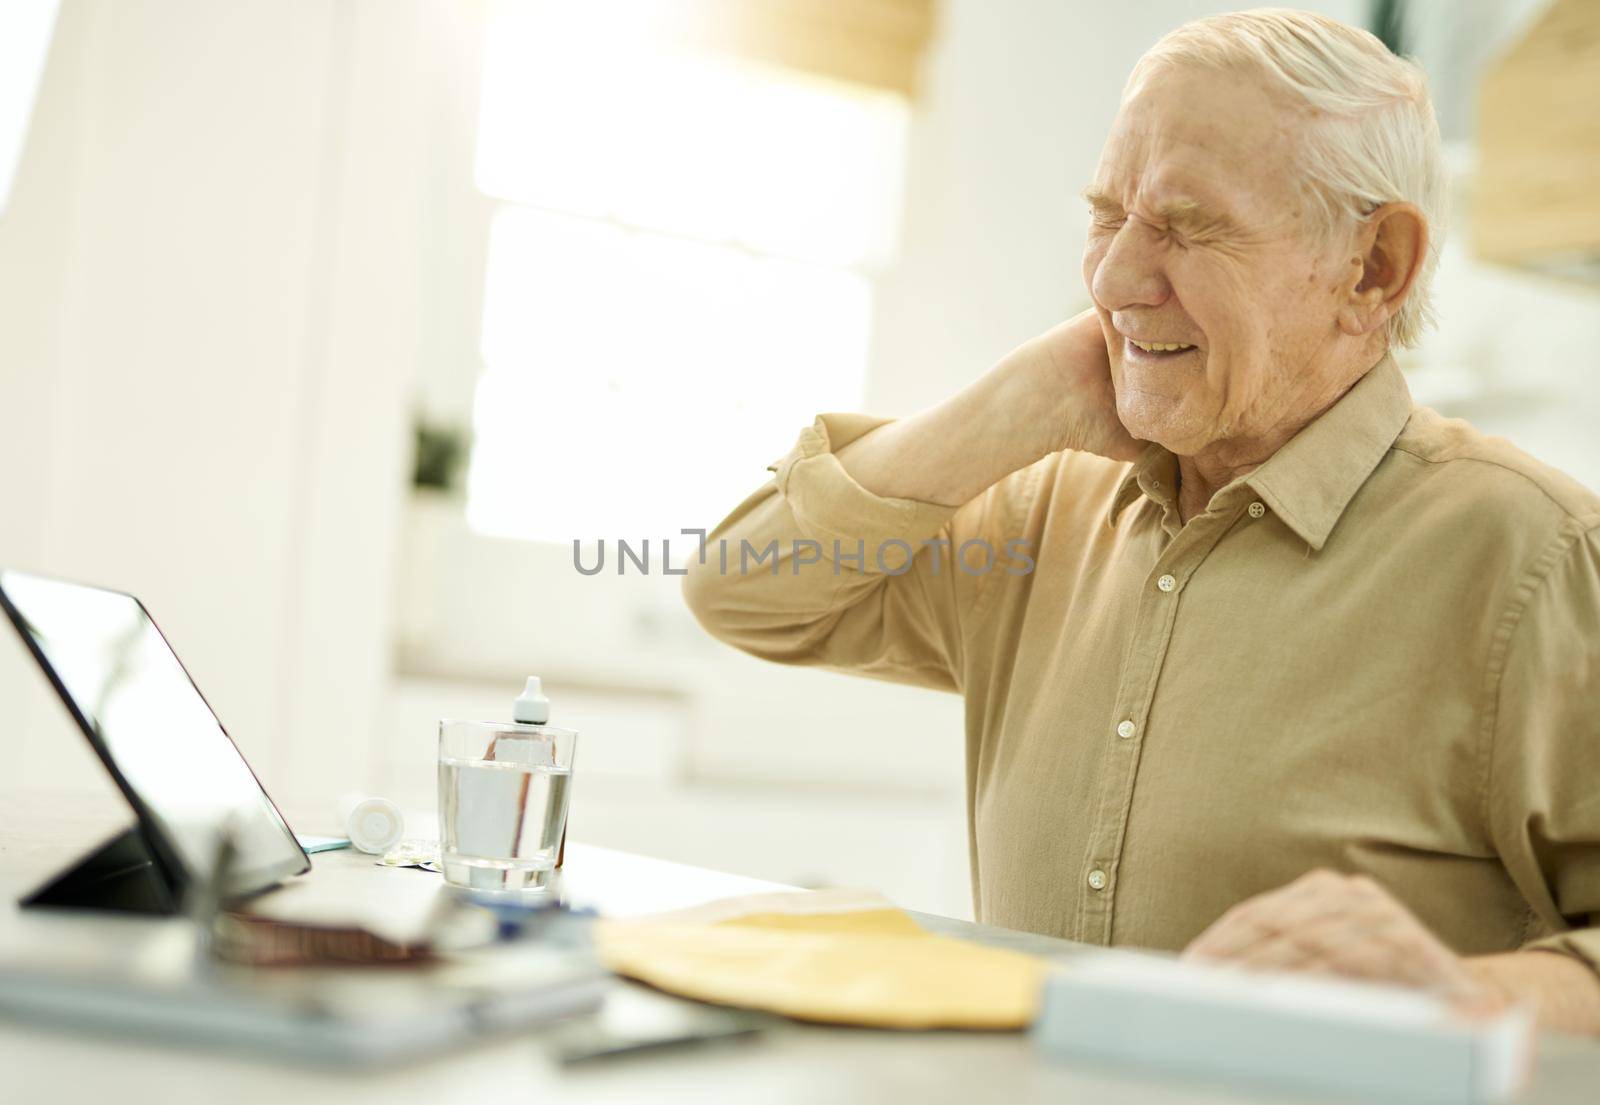 Distressed elderly man cringing in pain while touching his neck while getting medical consultation online